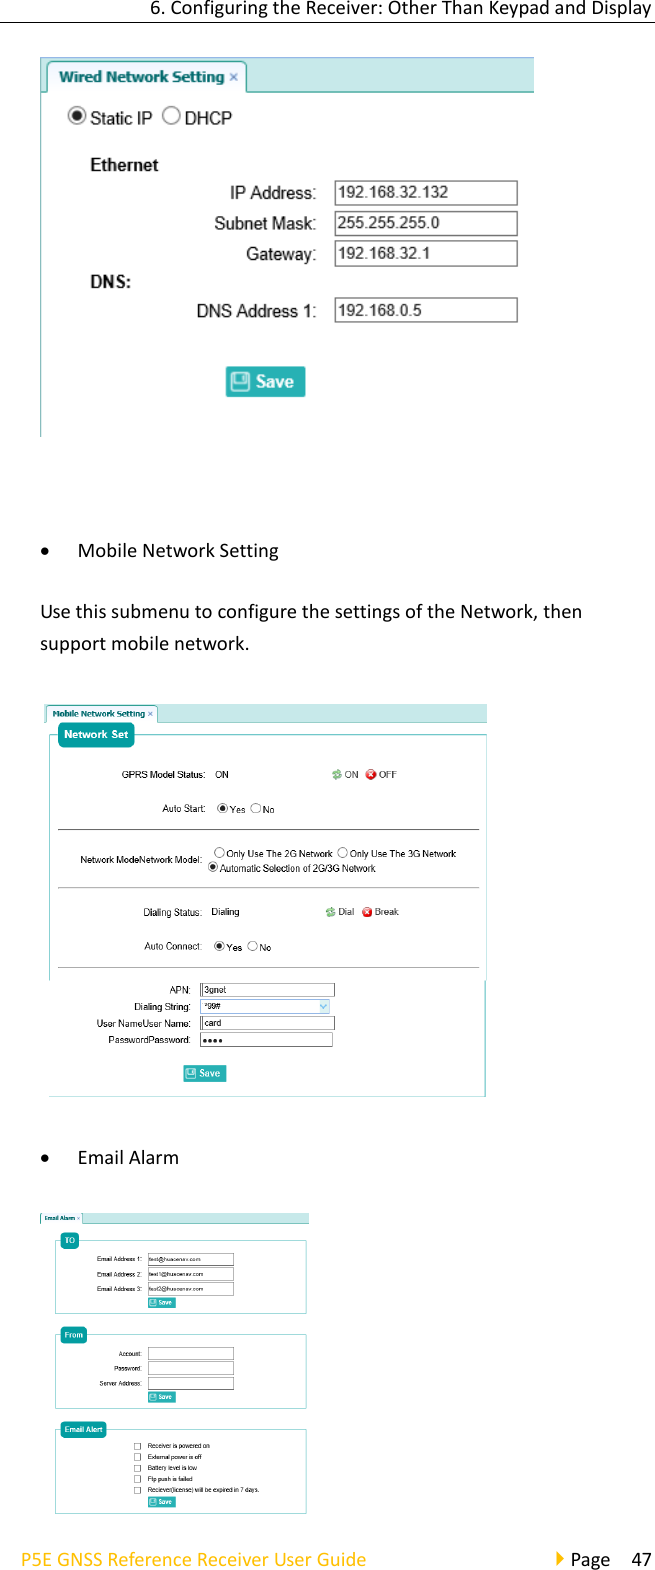 6. Configuring the Receiver: Other Than Keypad and Display P5E GNSS Reference Receiver User Guide                                     Page  47   • Mobile Network Setting Use this submenu to configure the settings of the Network, then support mobile network.       • Email Alarm  